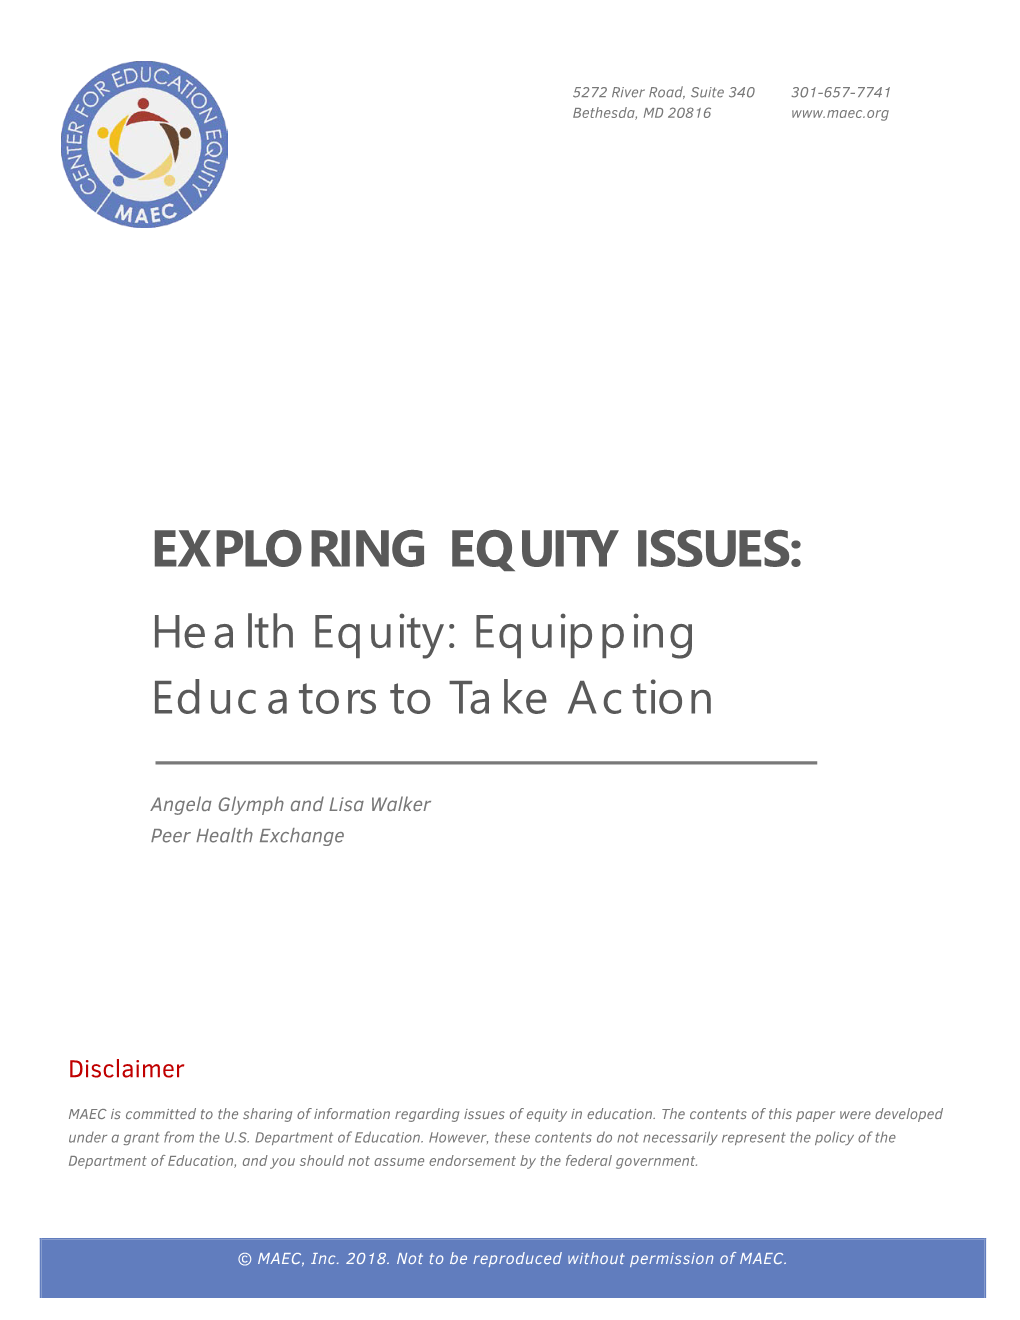 EXPLORING EQUITY ISSUES: Health Equity: Equipping Educators to Take Action